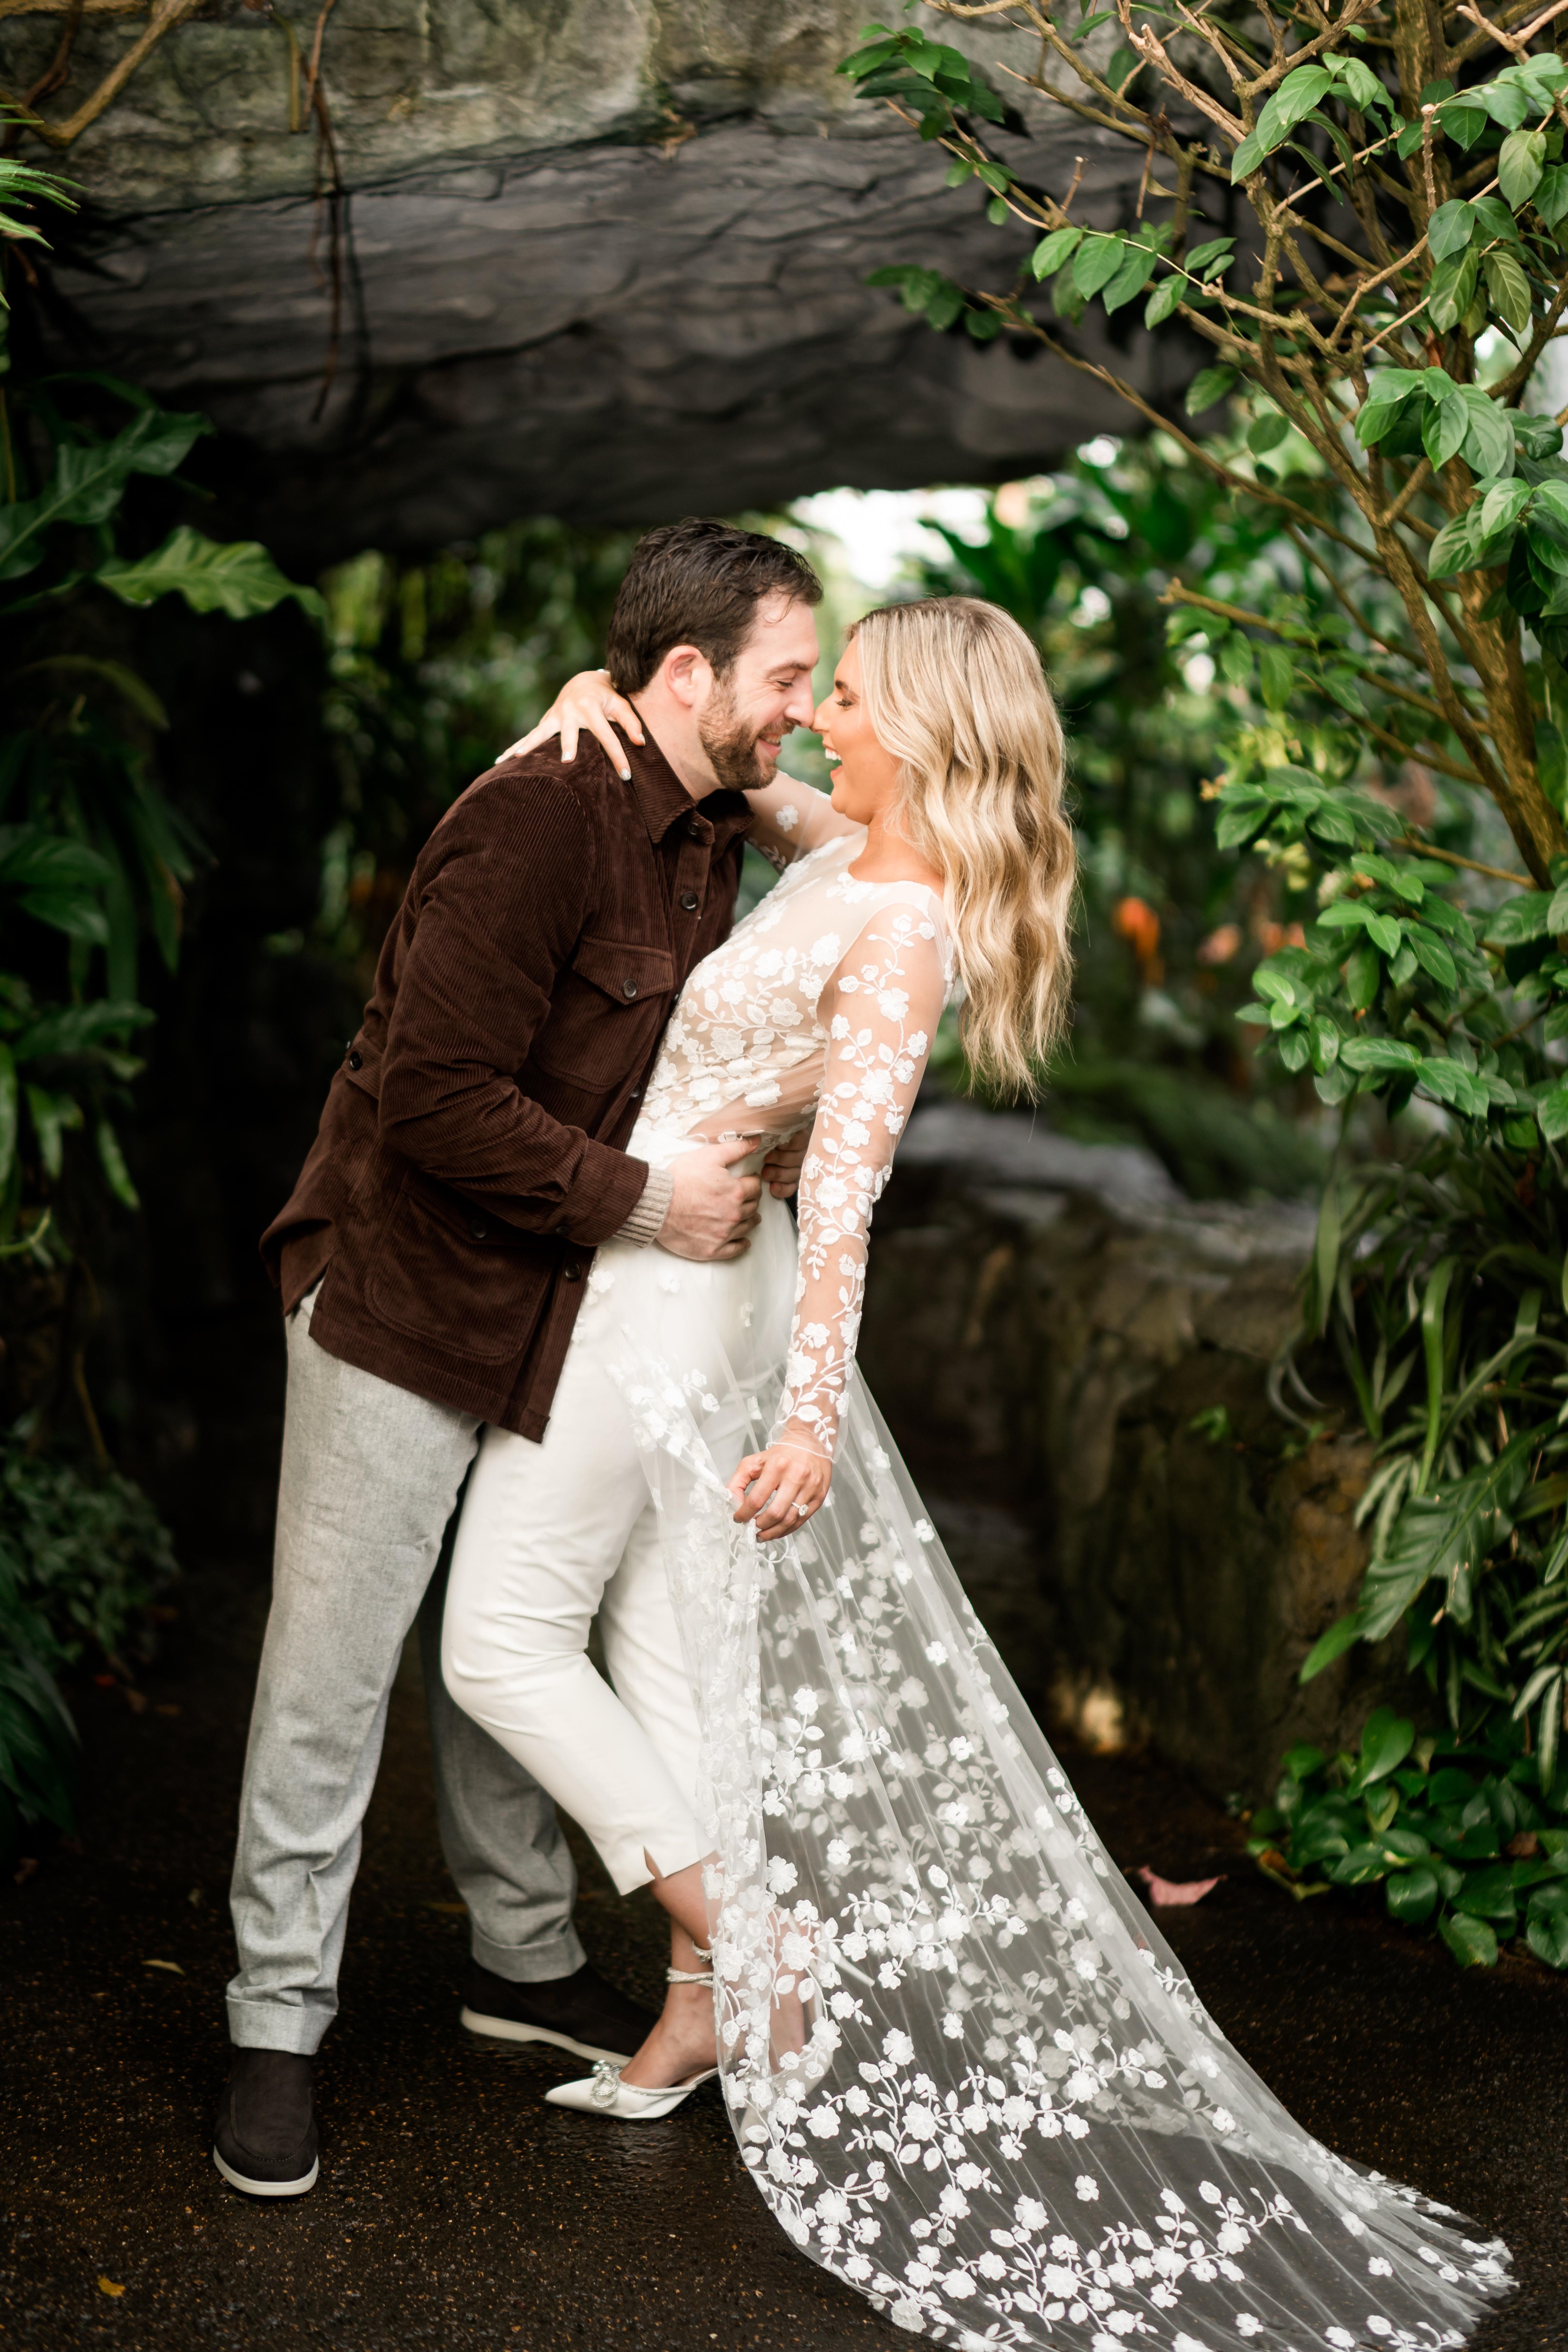 The Wedding Website of Tori Grosz and Jared Farber